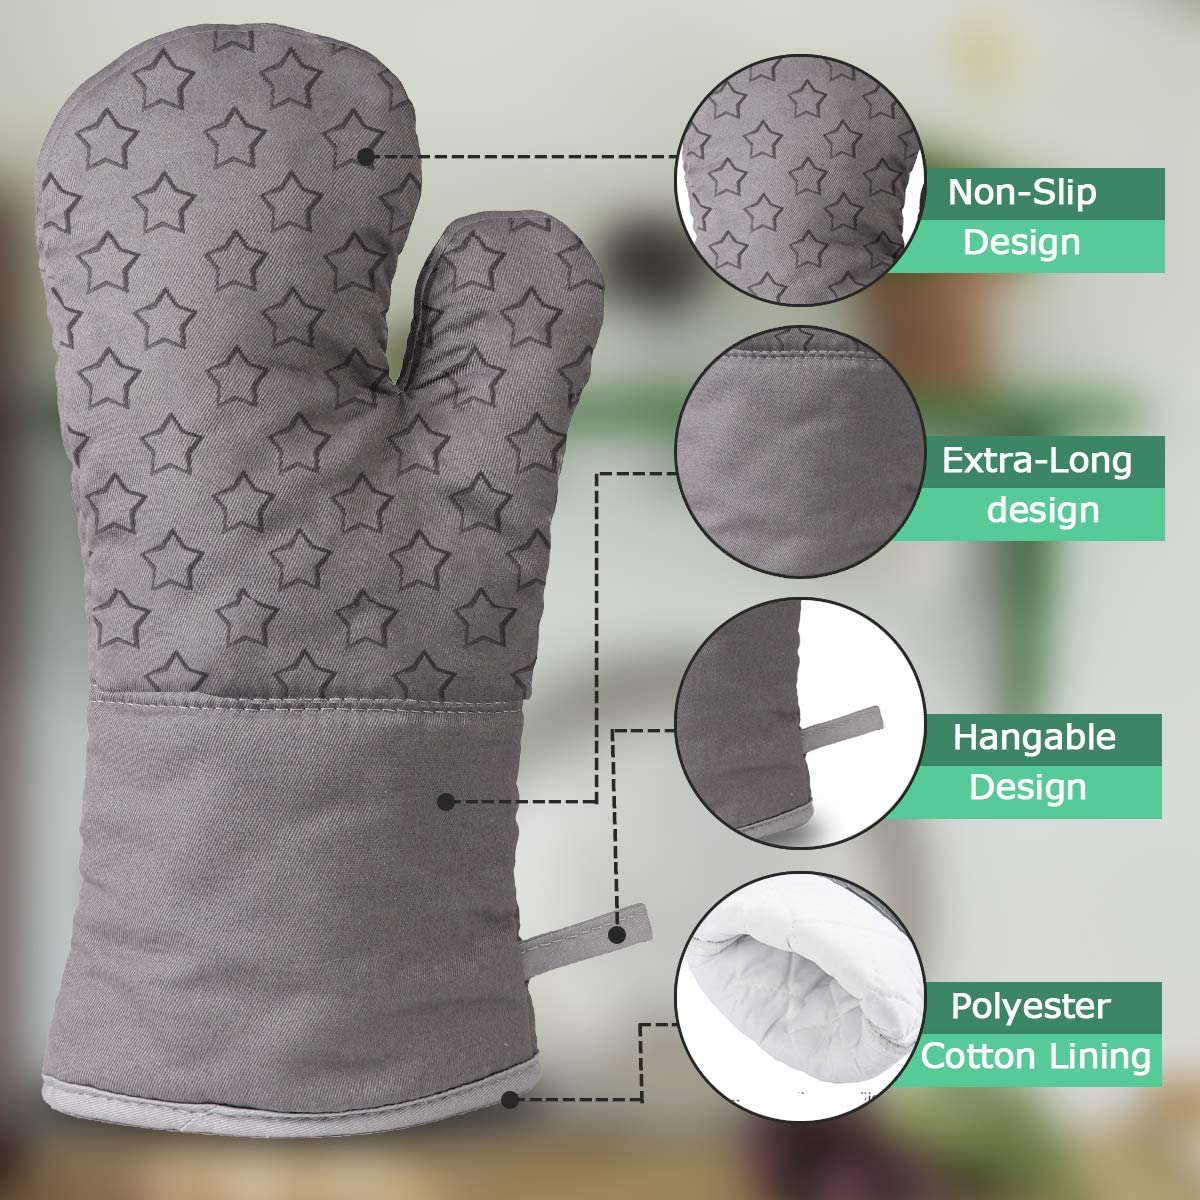 Oven Mitts and Pot Holders 6pcs Set, Kitchen Oven Glove High Heat Resistant 500 Degree Extra Long Oven Mitts and Potholder with Non-Slip Silicone Surface $8.49